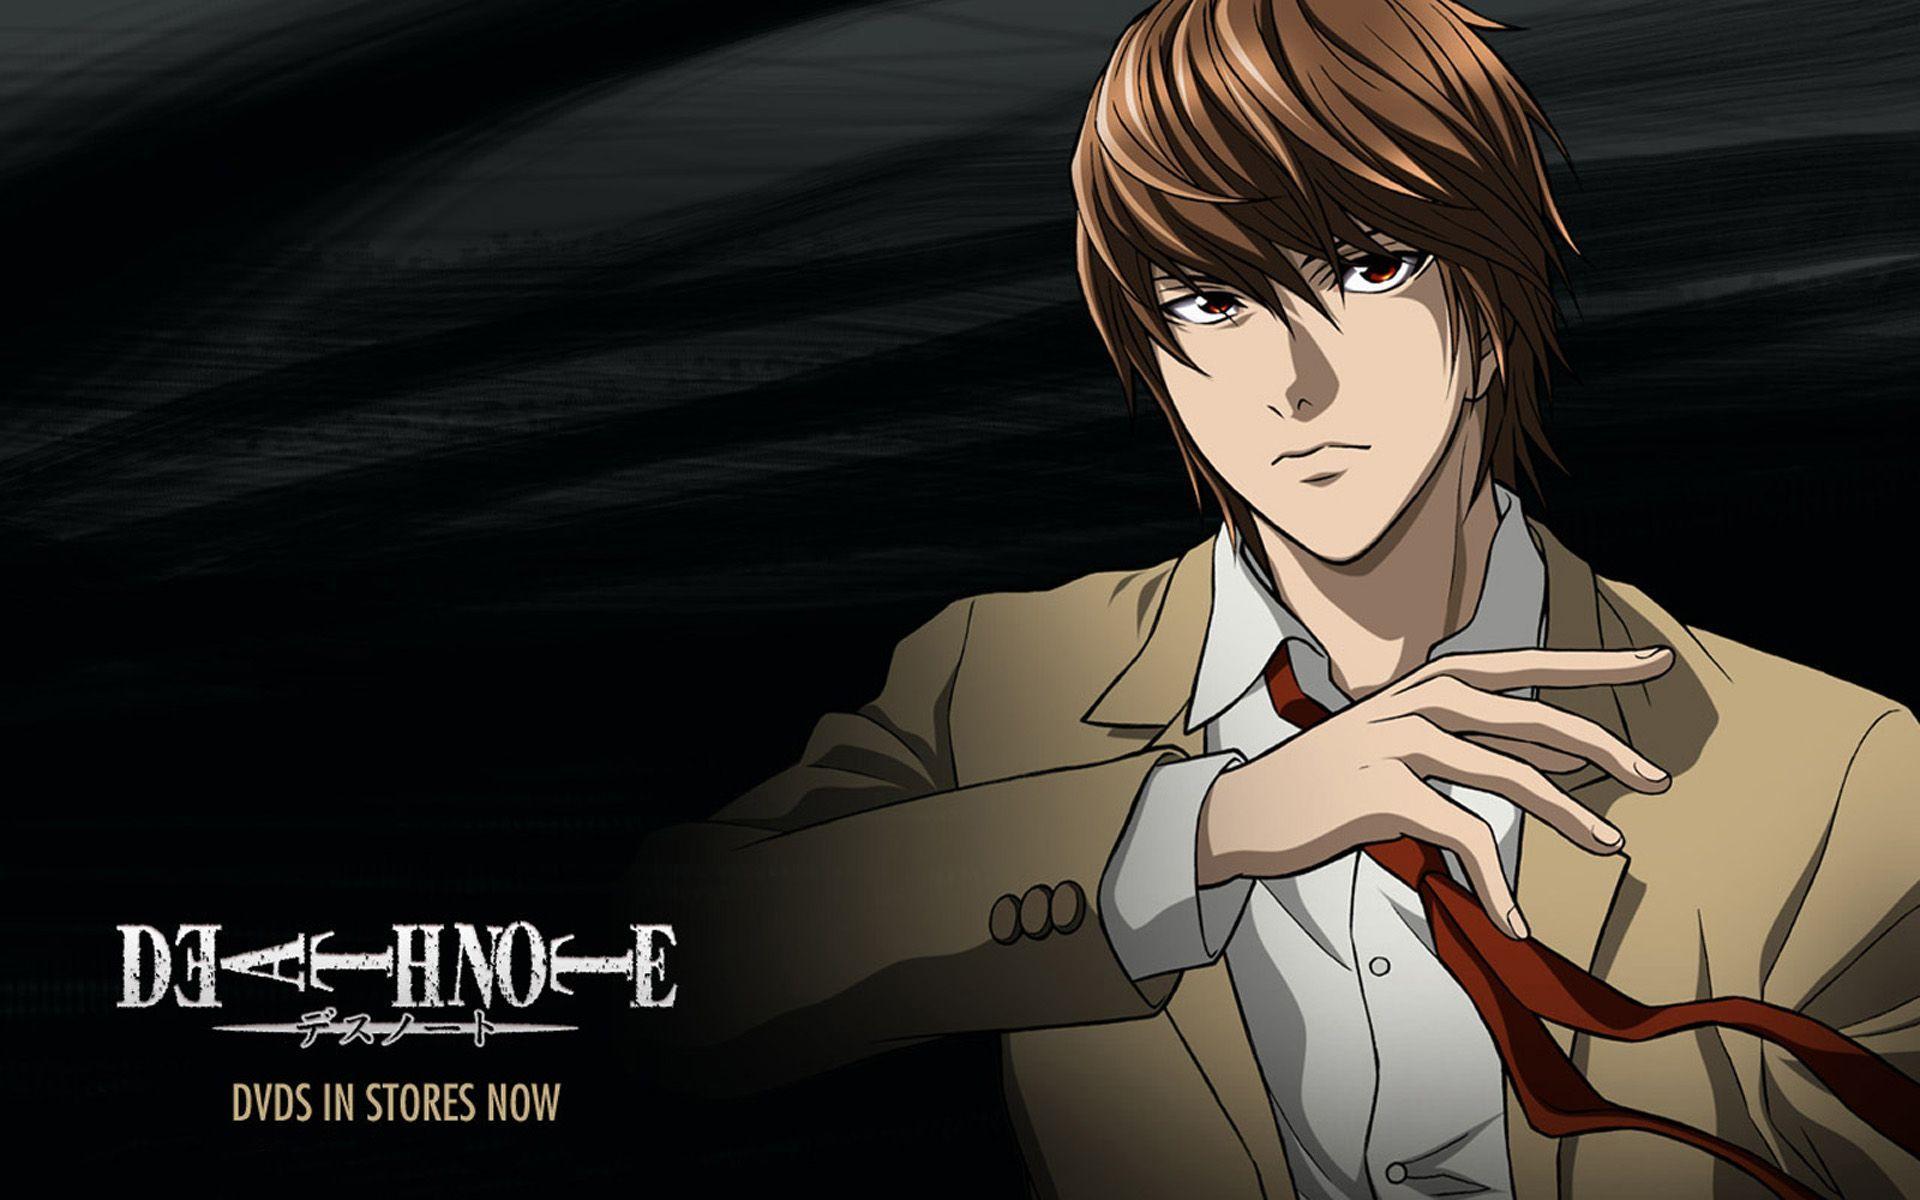 Light Yagami HD Wallpaper And Photo download 1920×1080 Light